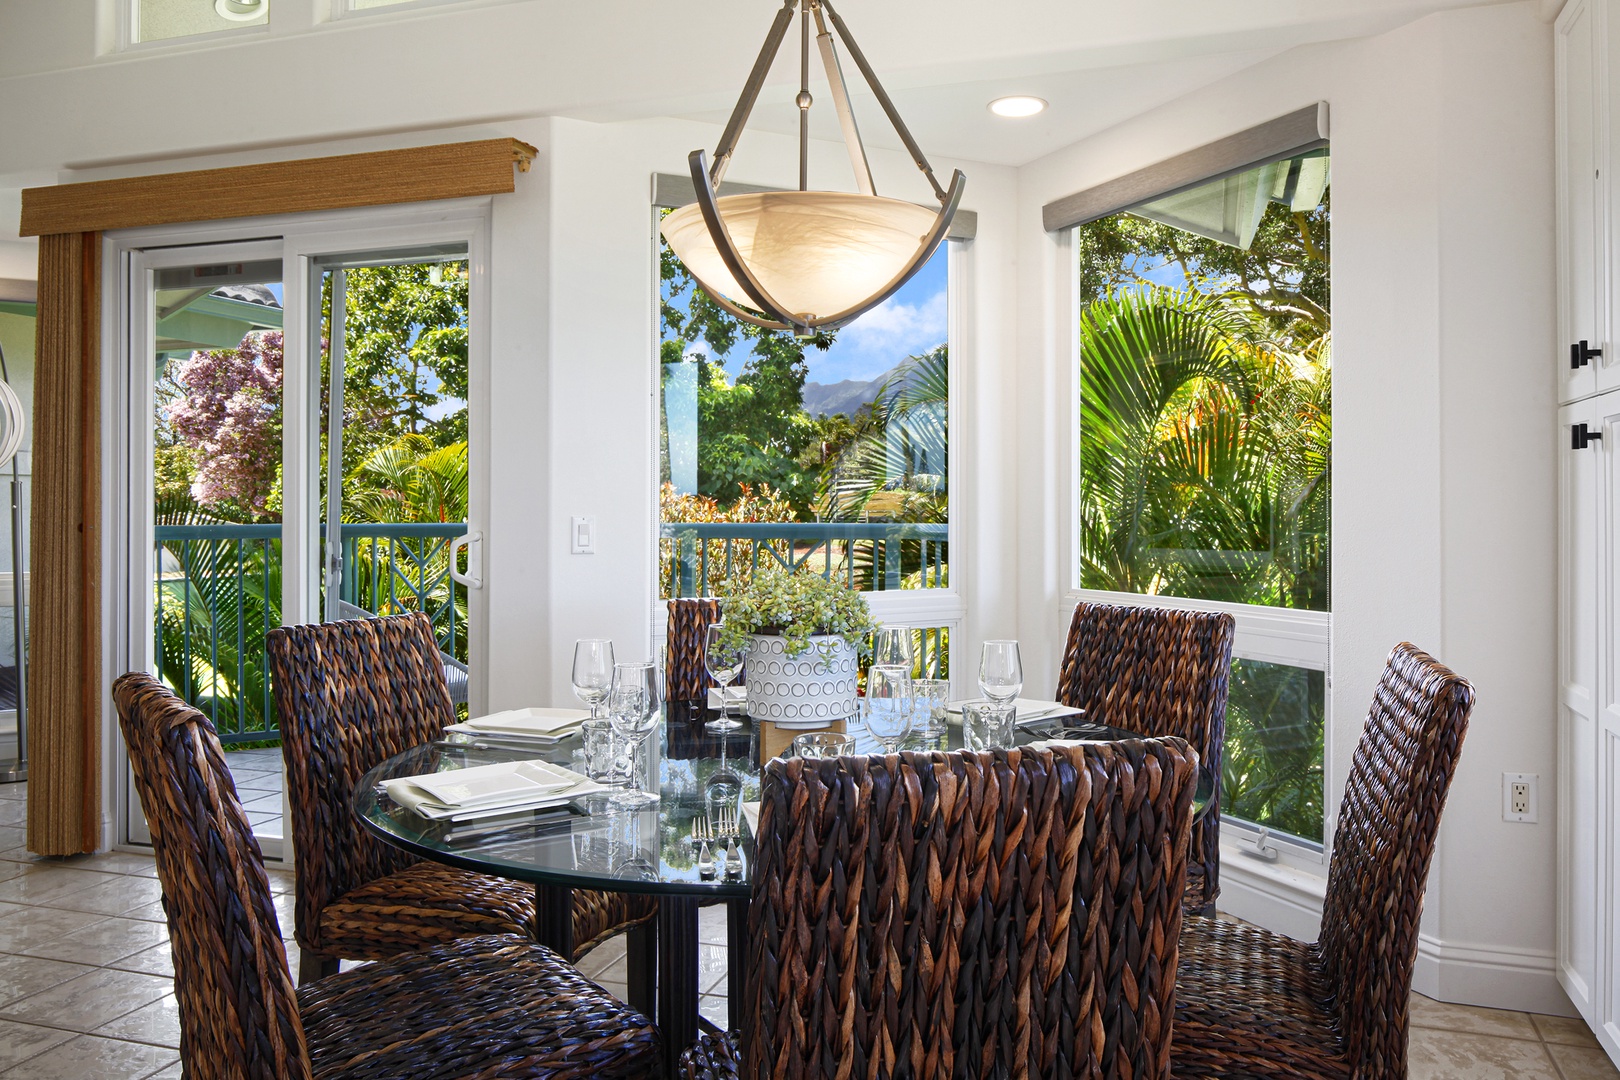 Princeville Vacation Rentals, Villas on the Prince #28 - The dining area comfortably seats 6 and has gorgeous views of the tropical landscape